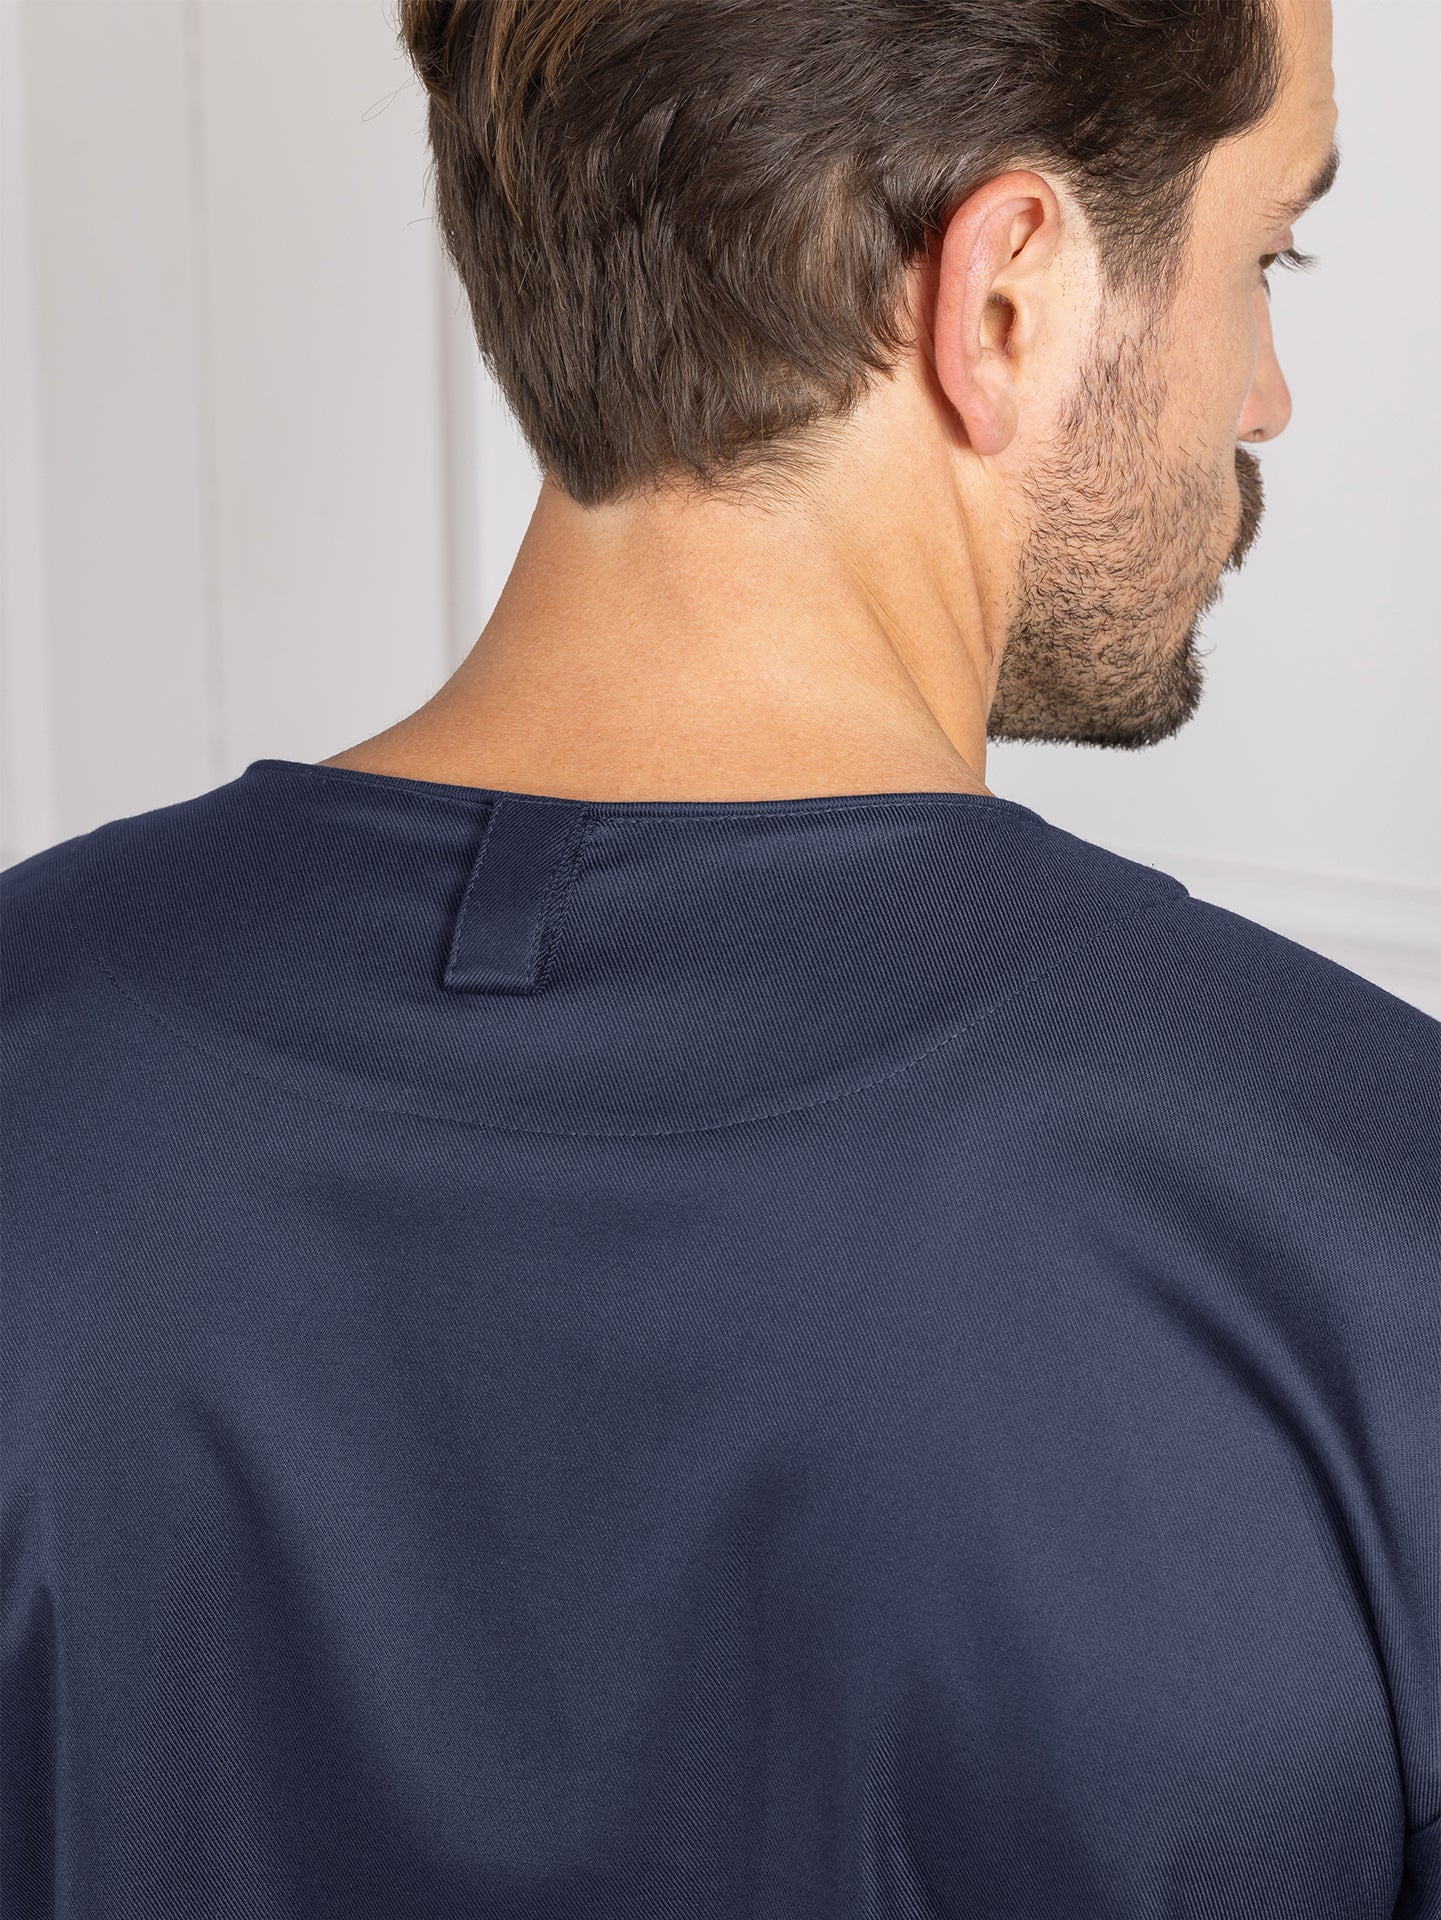 Oversized T-shirt Norian Deep Blue by Le Nouveau Chef for chef and service.